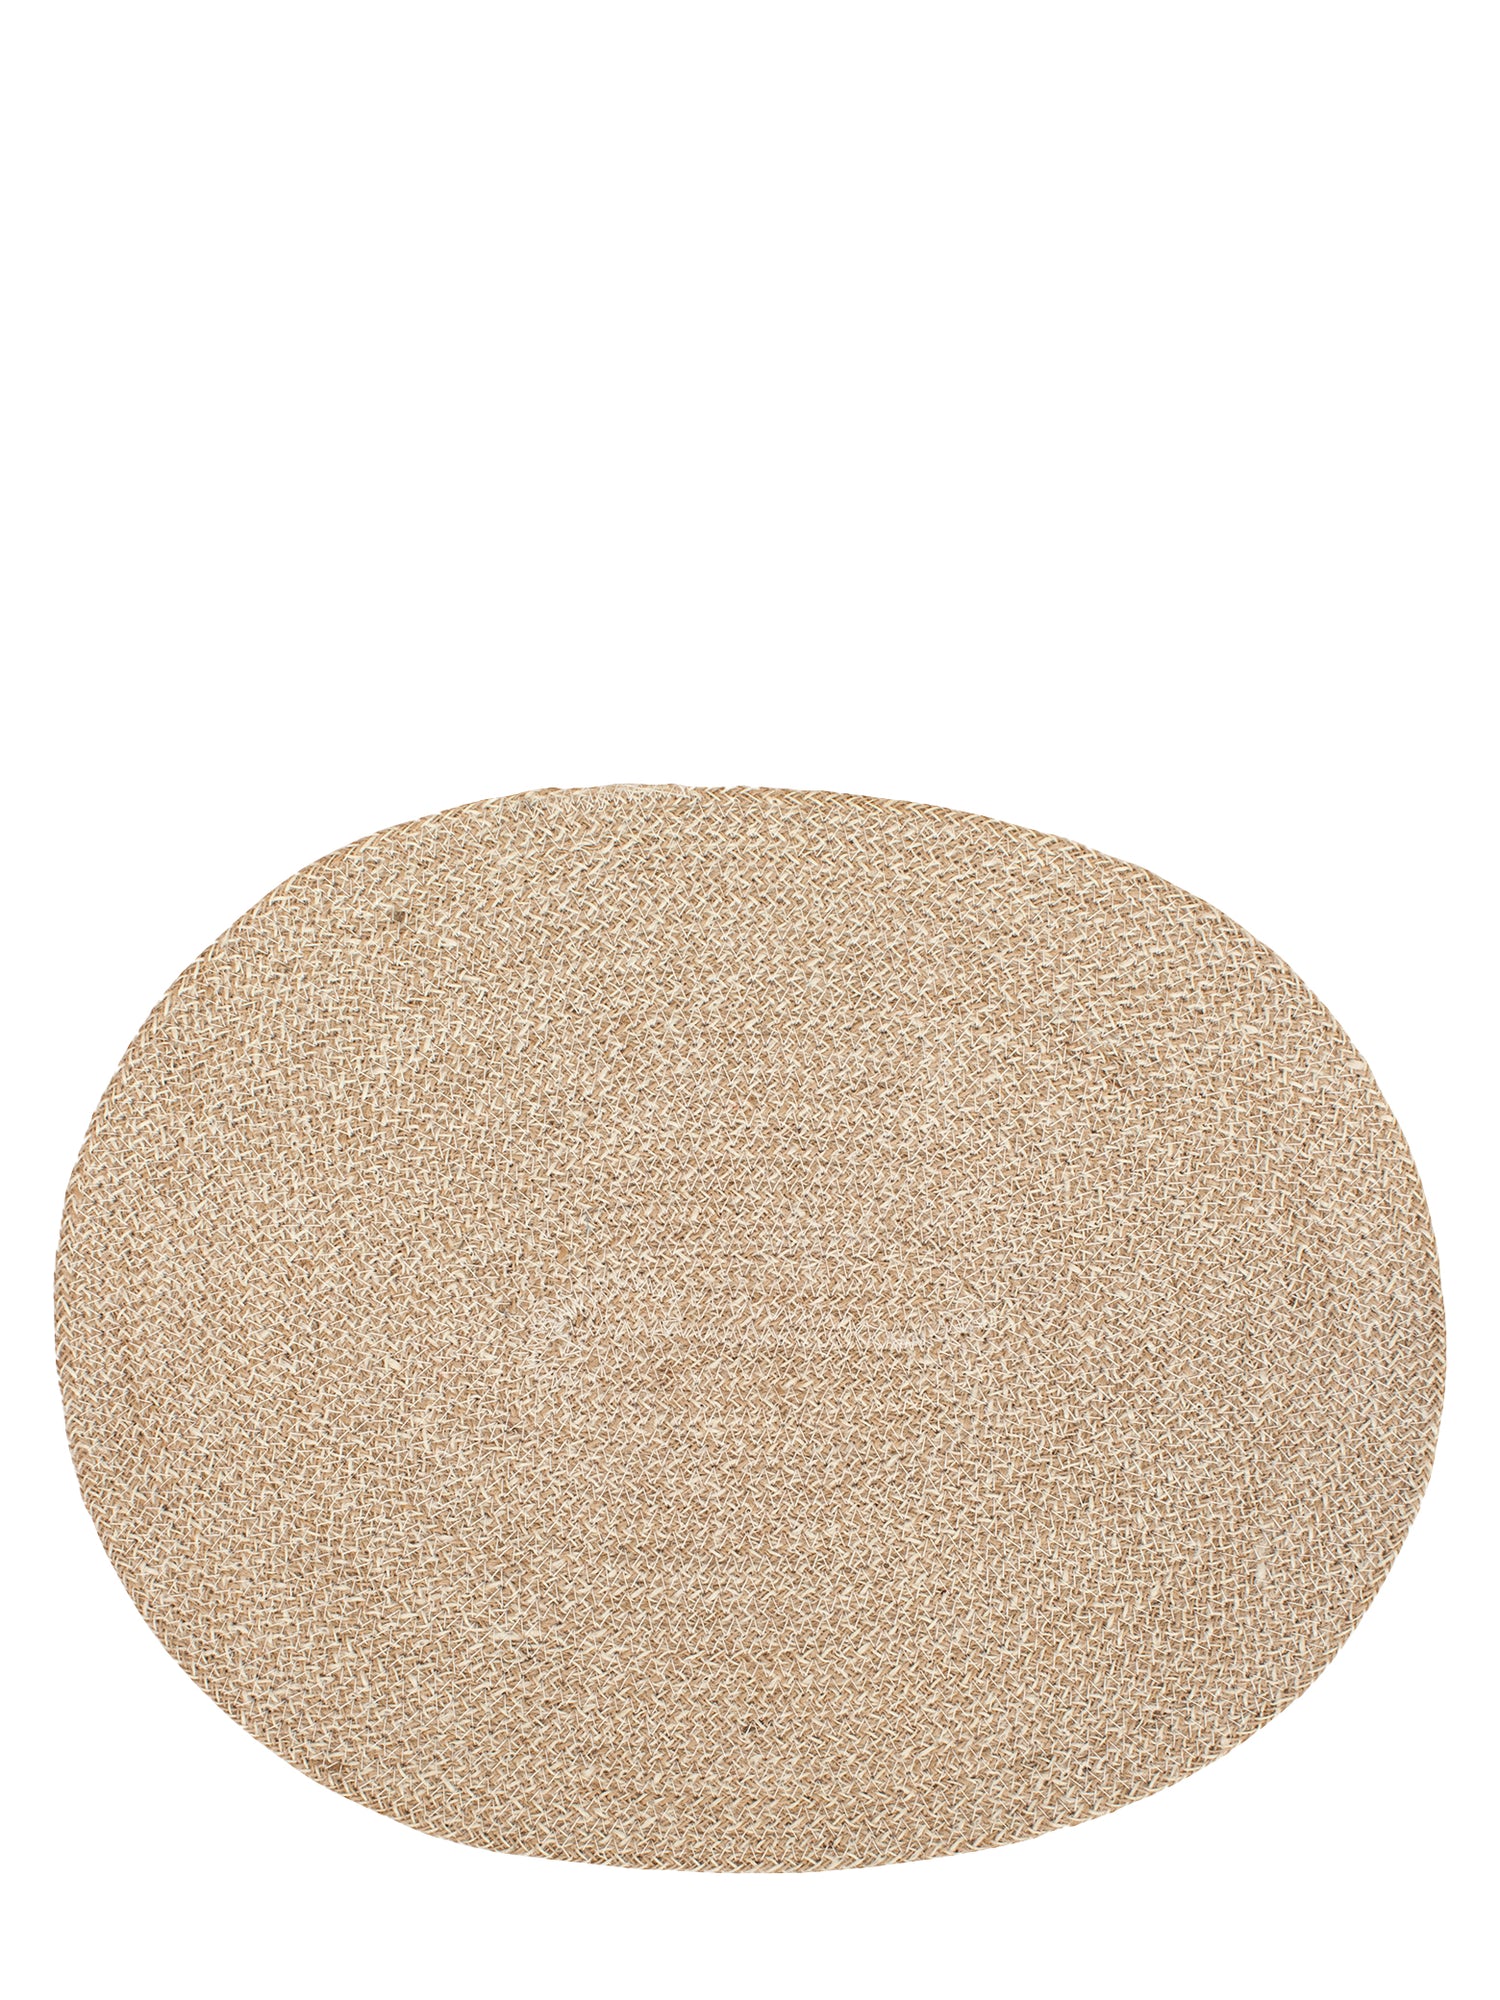 Oval placemat Ella, white-natural